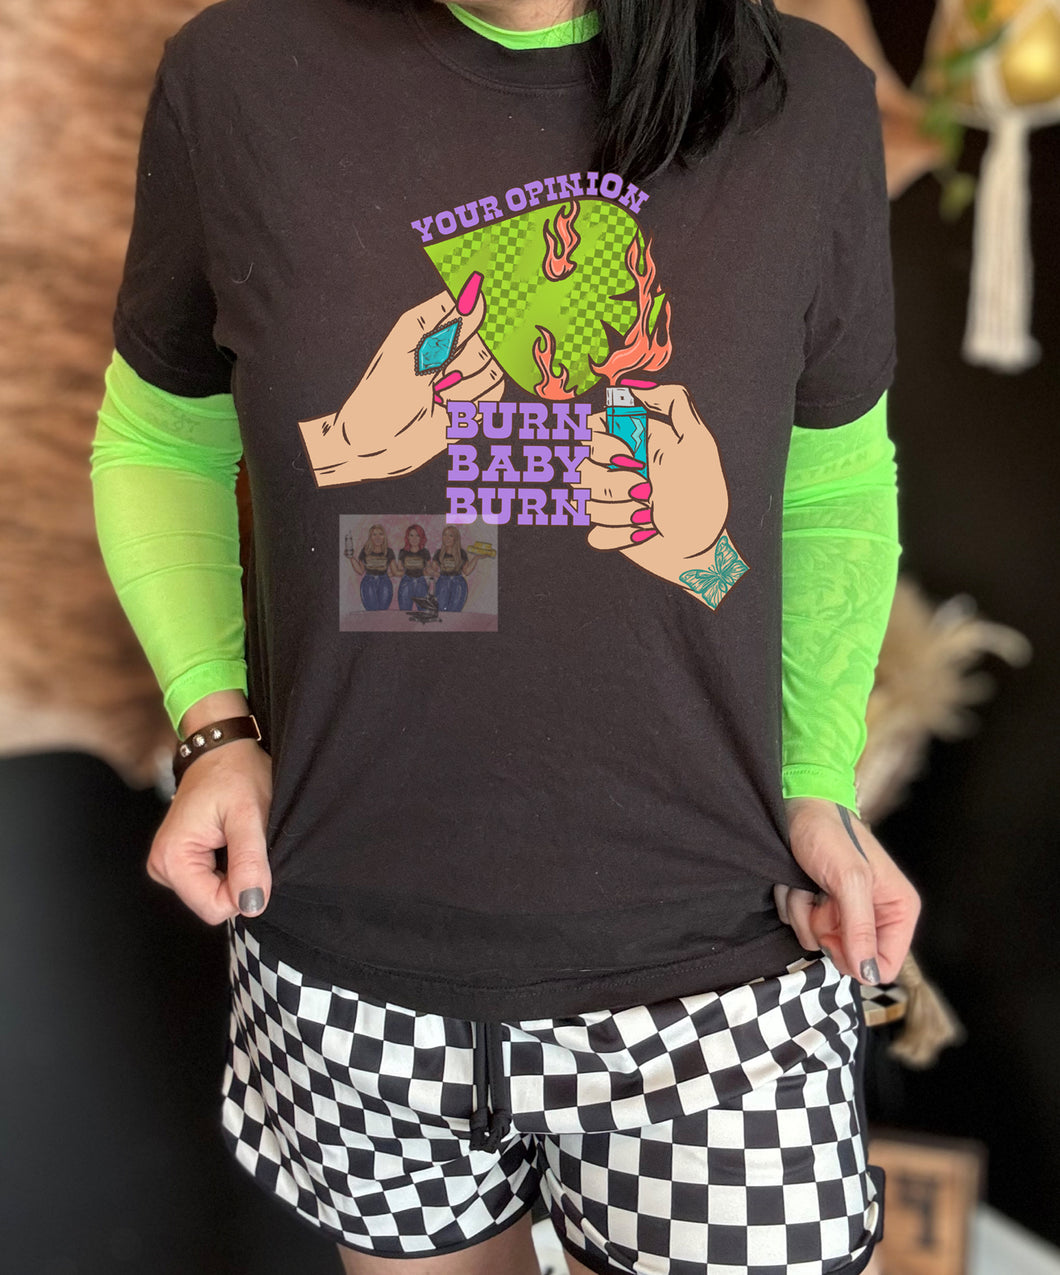 Your opinion burn baby burn spade graphic tee  // neon green mesh long sleeve // checkered shorts sold separately - Mavictoria Designs Hot Press Express